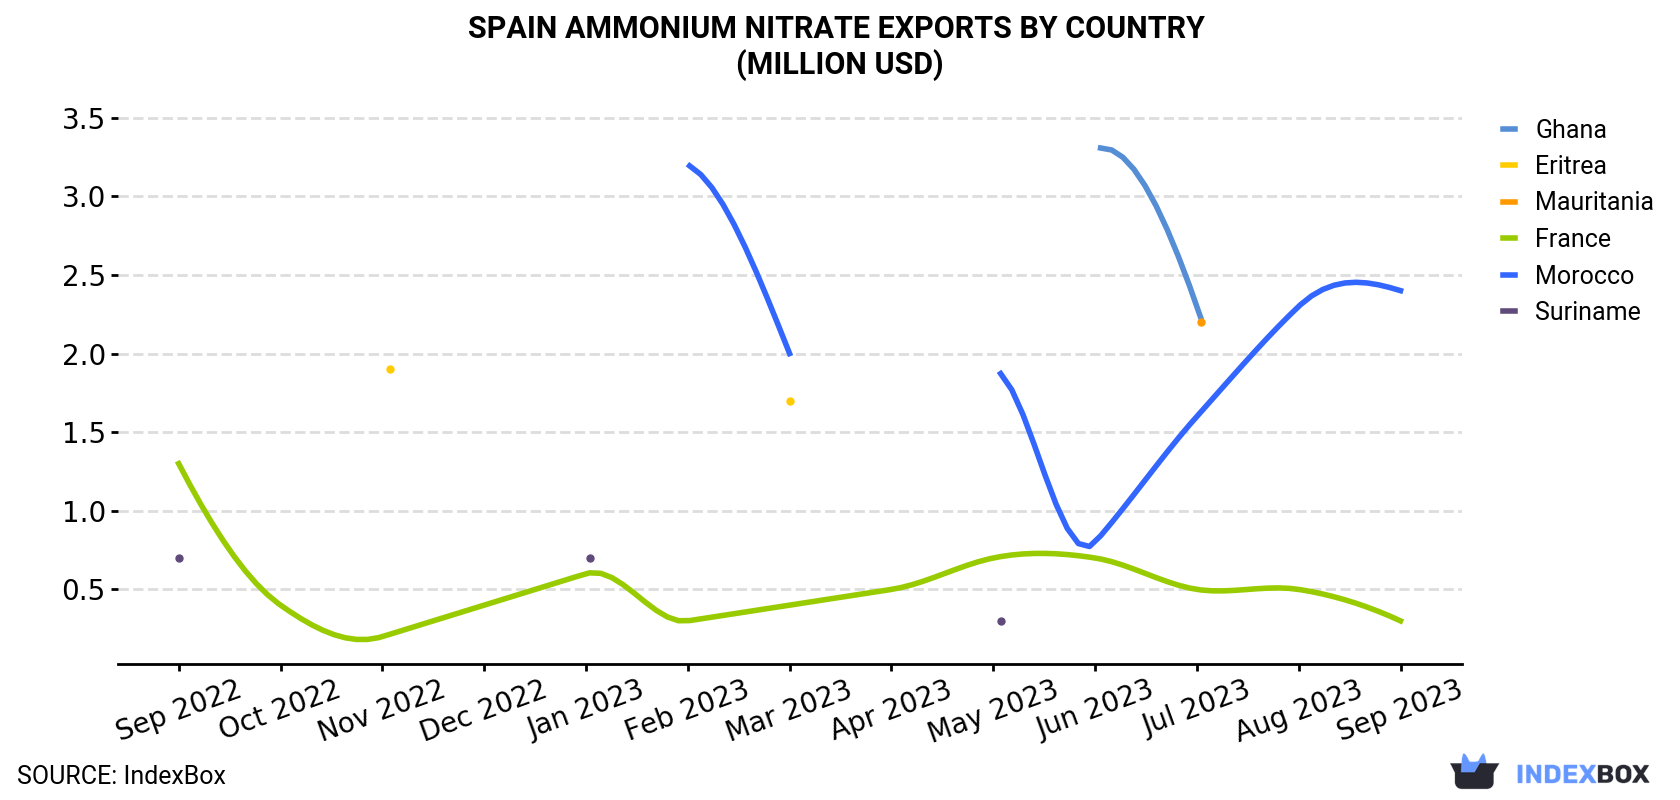 Spain Ammonium Nitrate Exports By Country (Million USD)